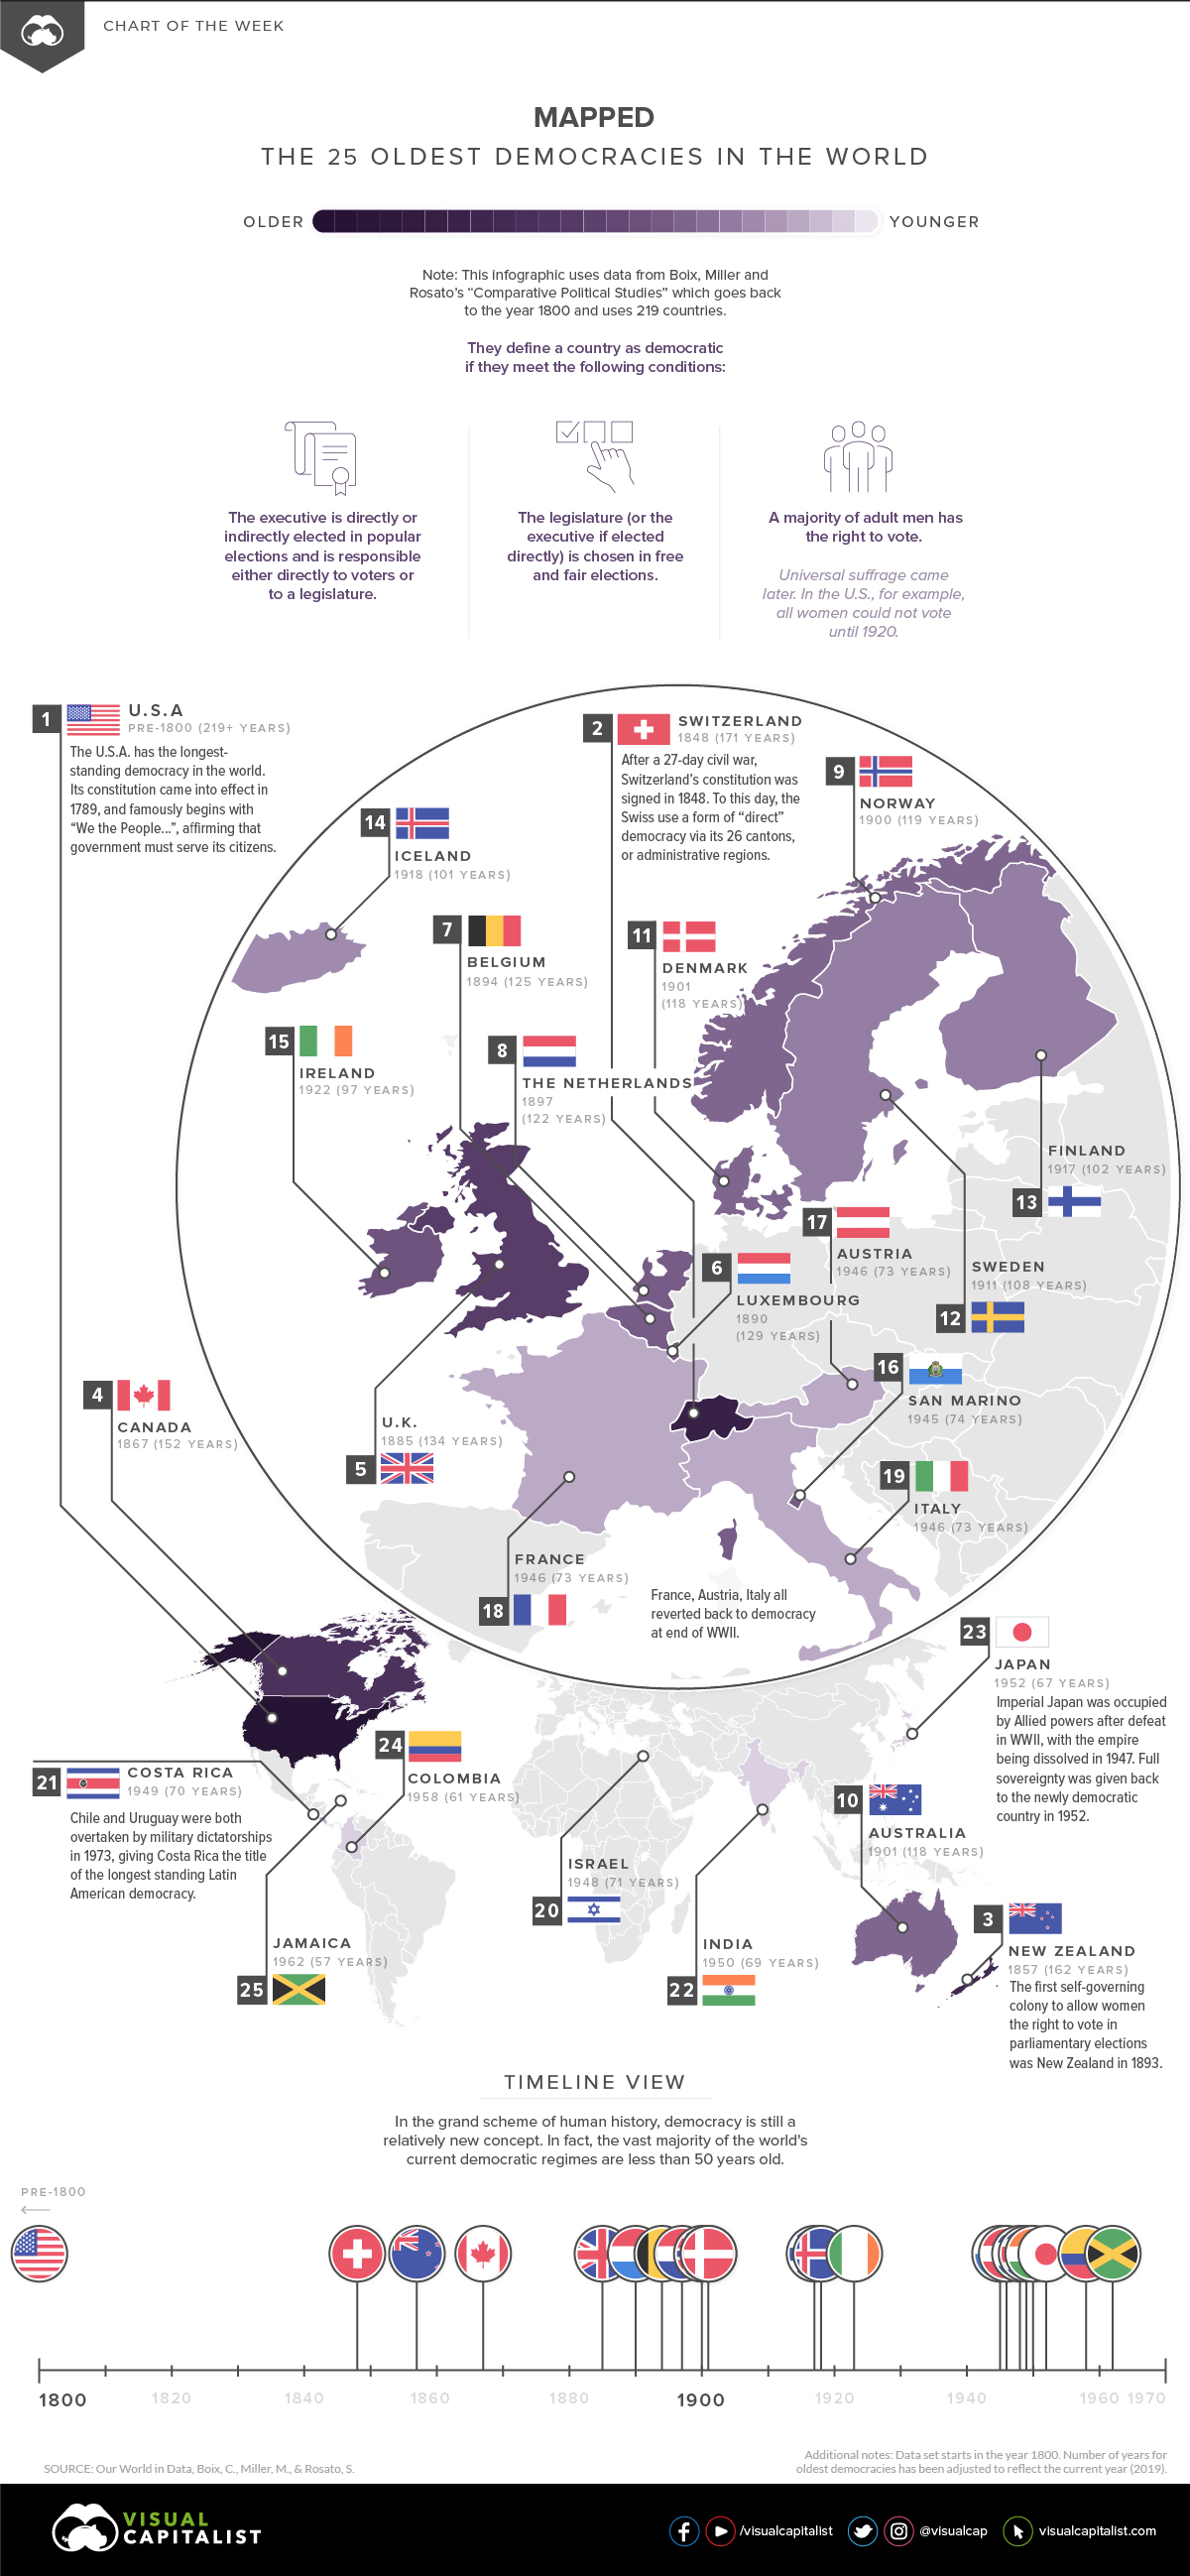 Mapped: The World's Oldest Democracies